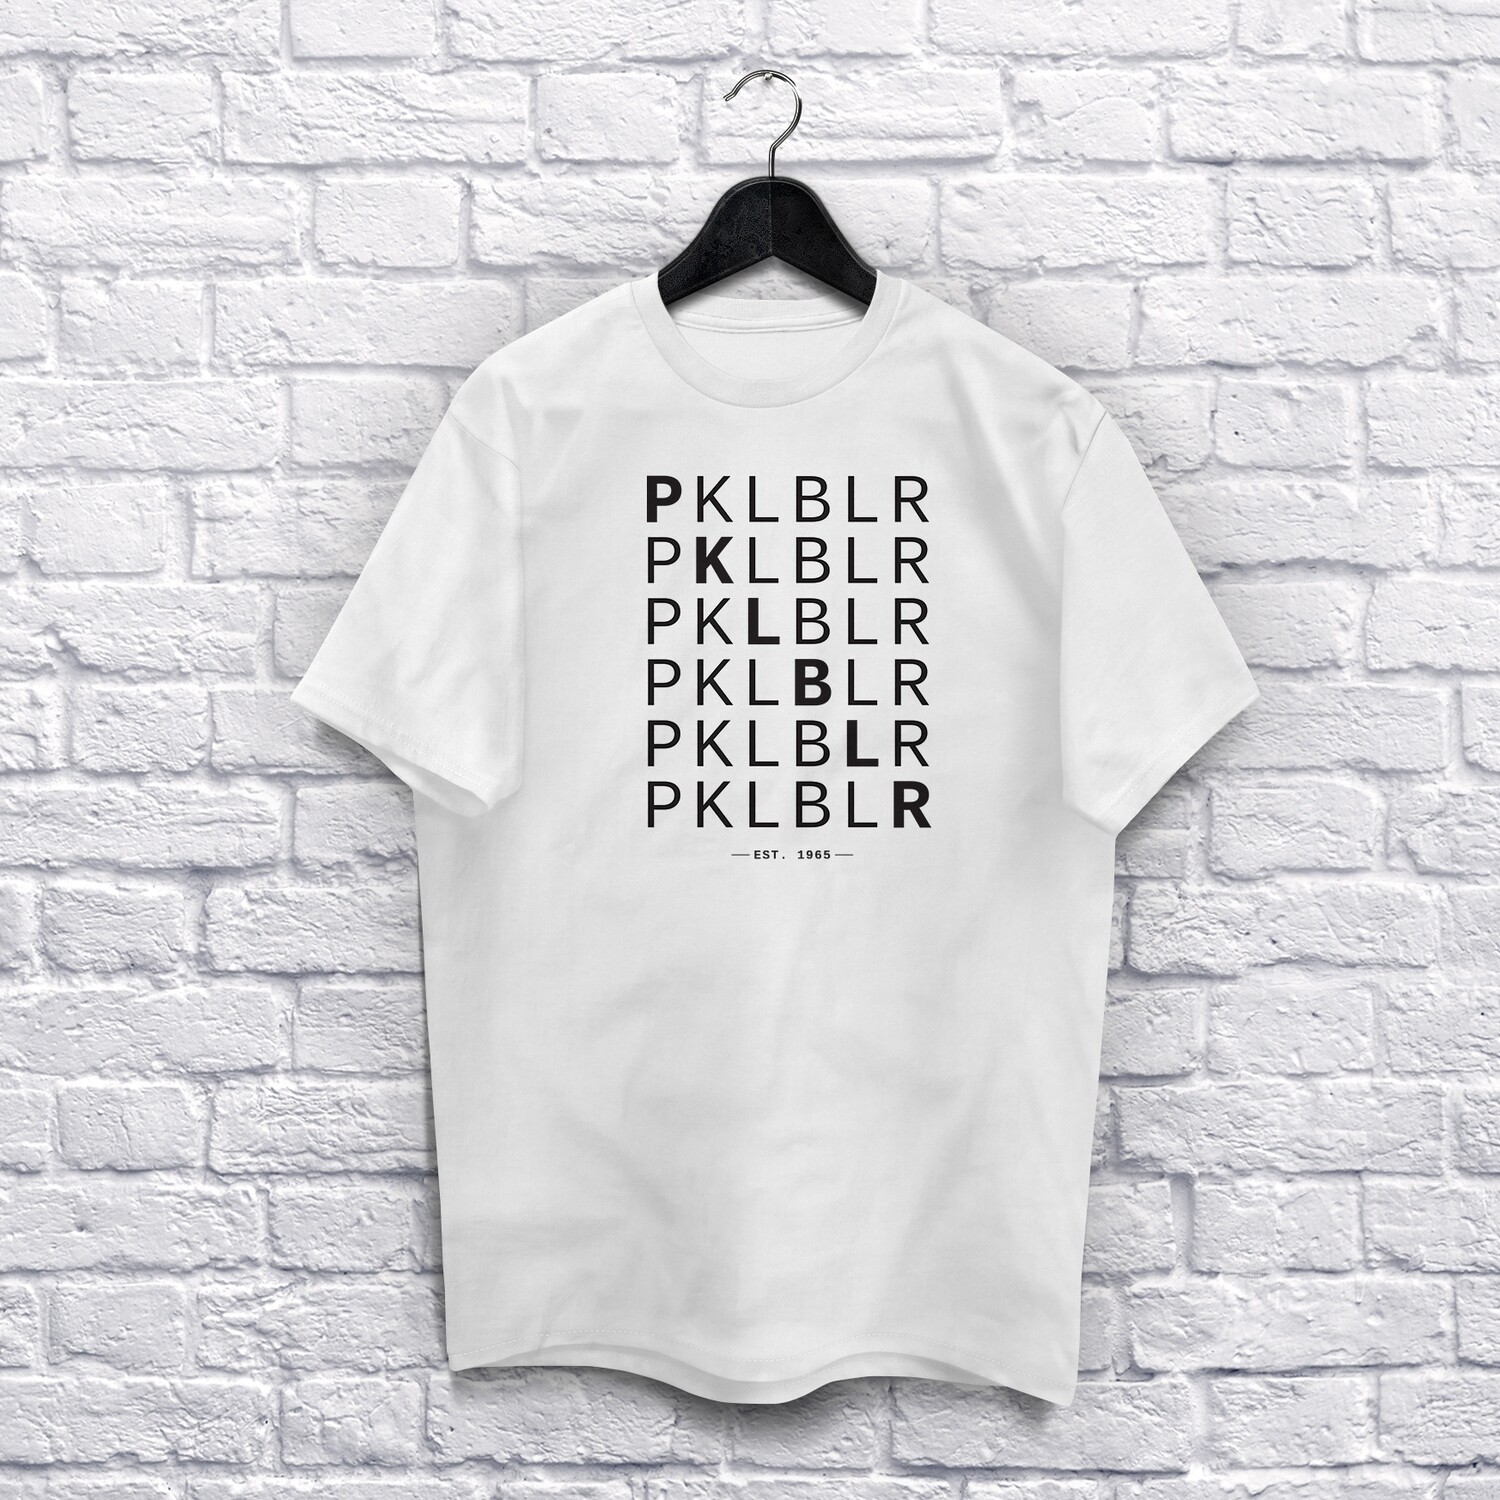 The PKLBLR Repetition Tee